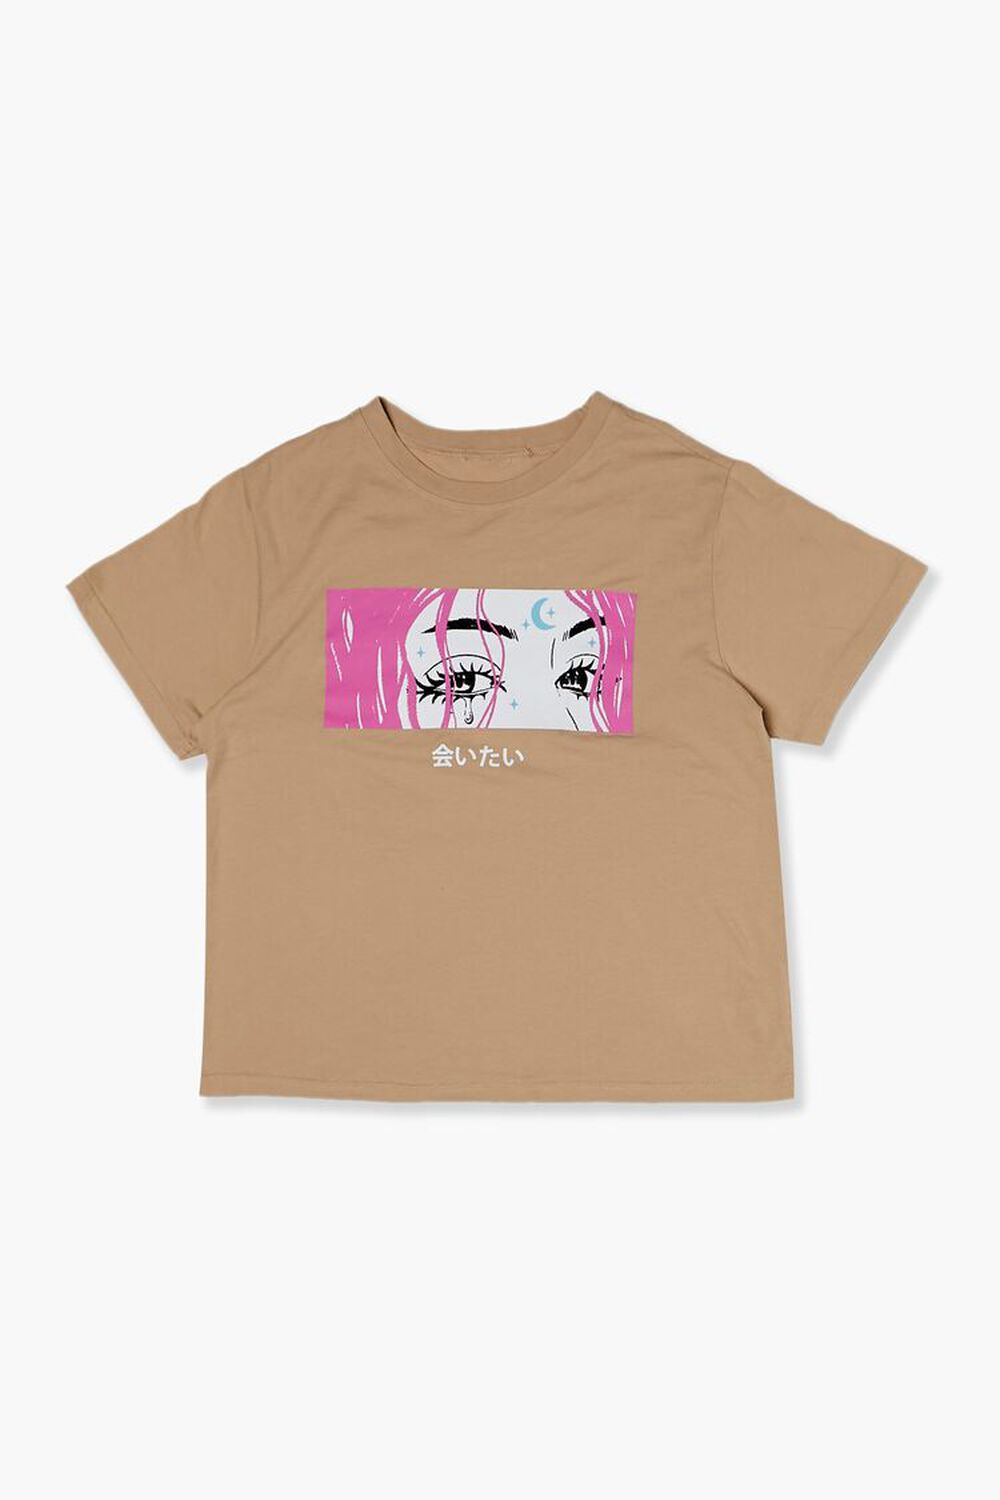 TAUPE/MULTI I Miss You Graphic Tee, image 1